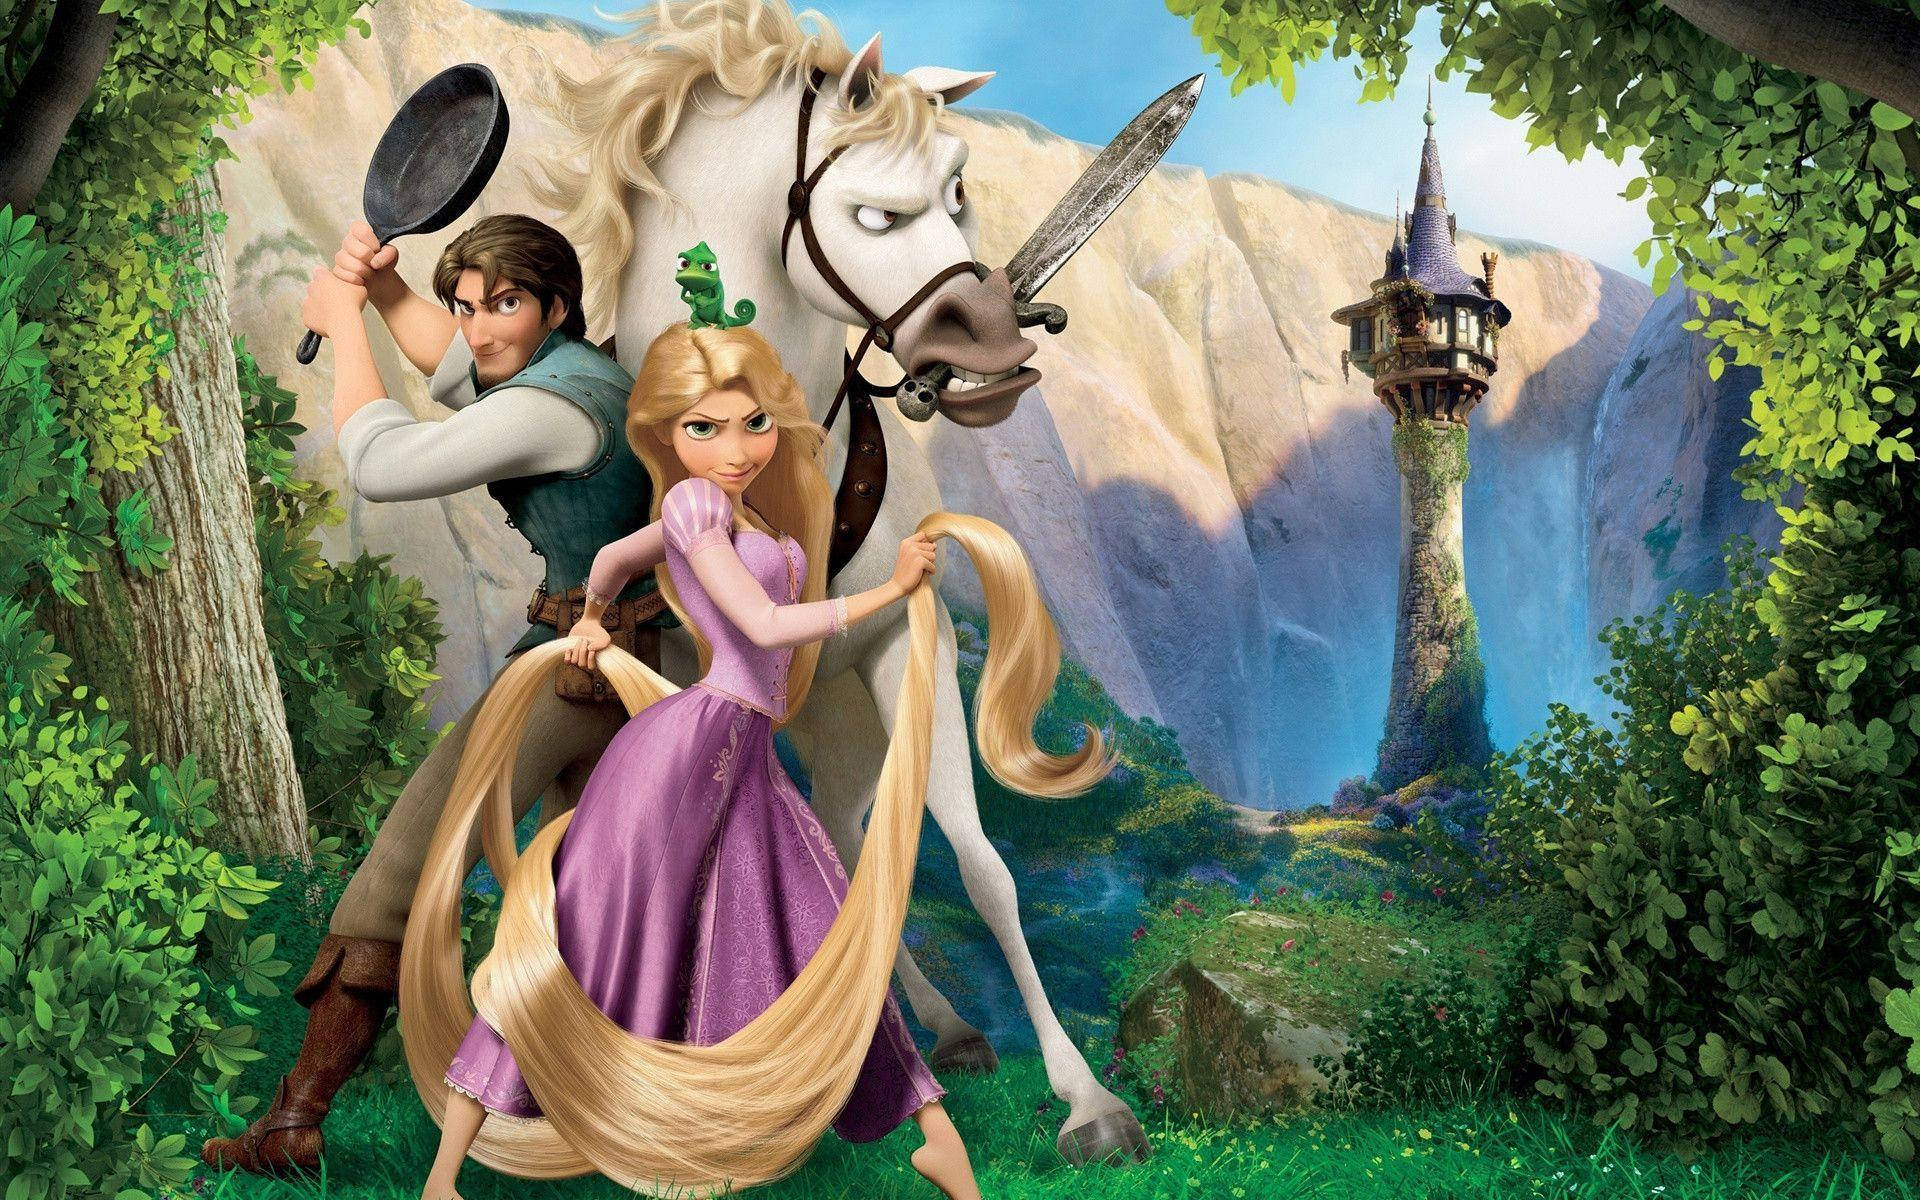 Rapunzel, A Courageous Young Woman, Uses Her Magical Hair To Take Control Of Her Fate.